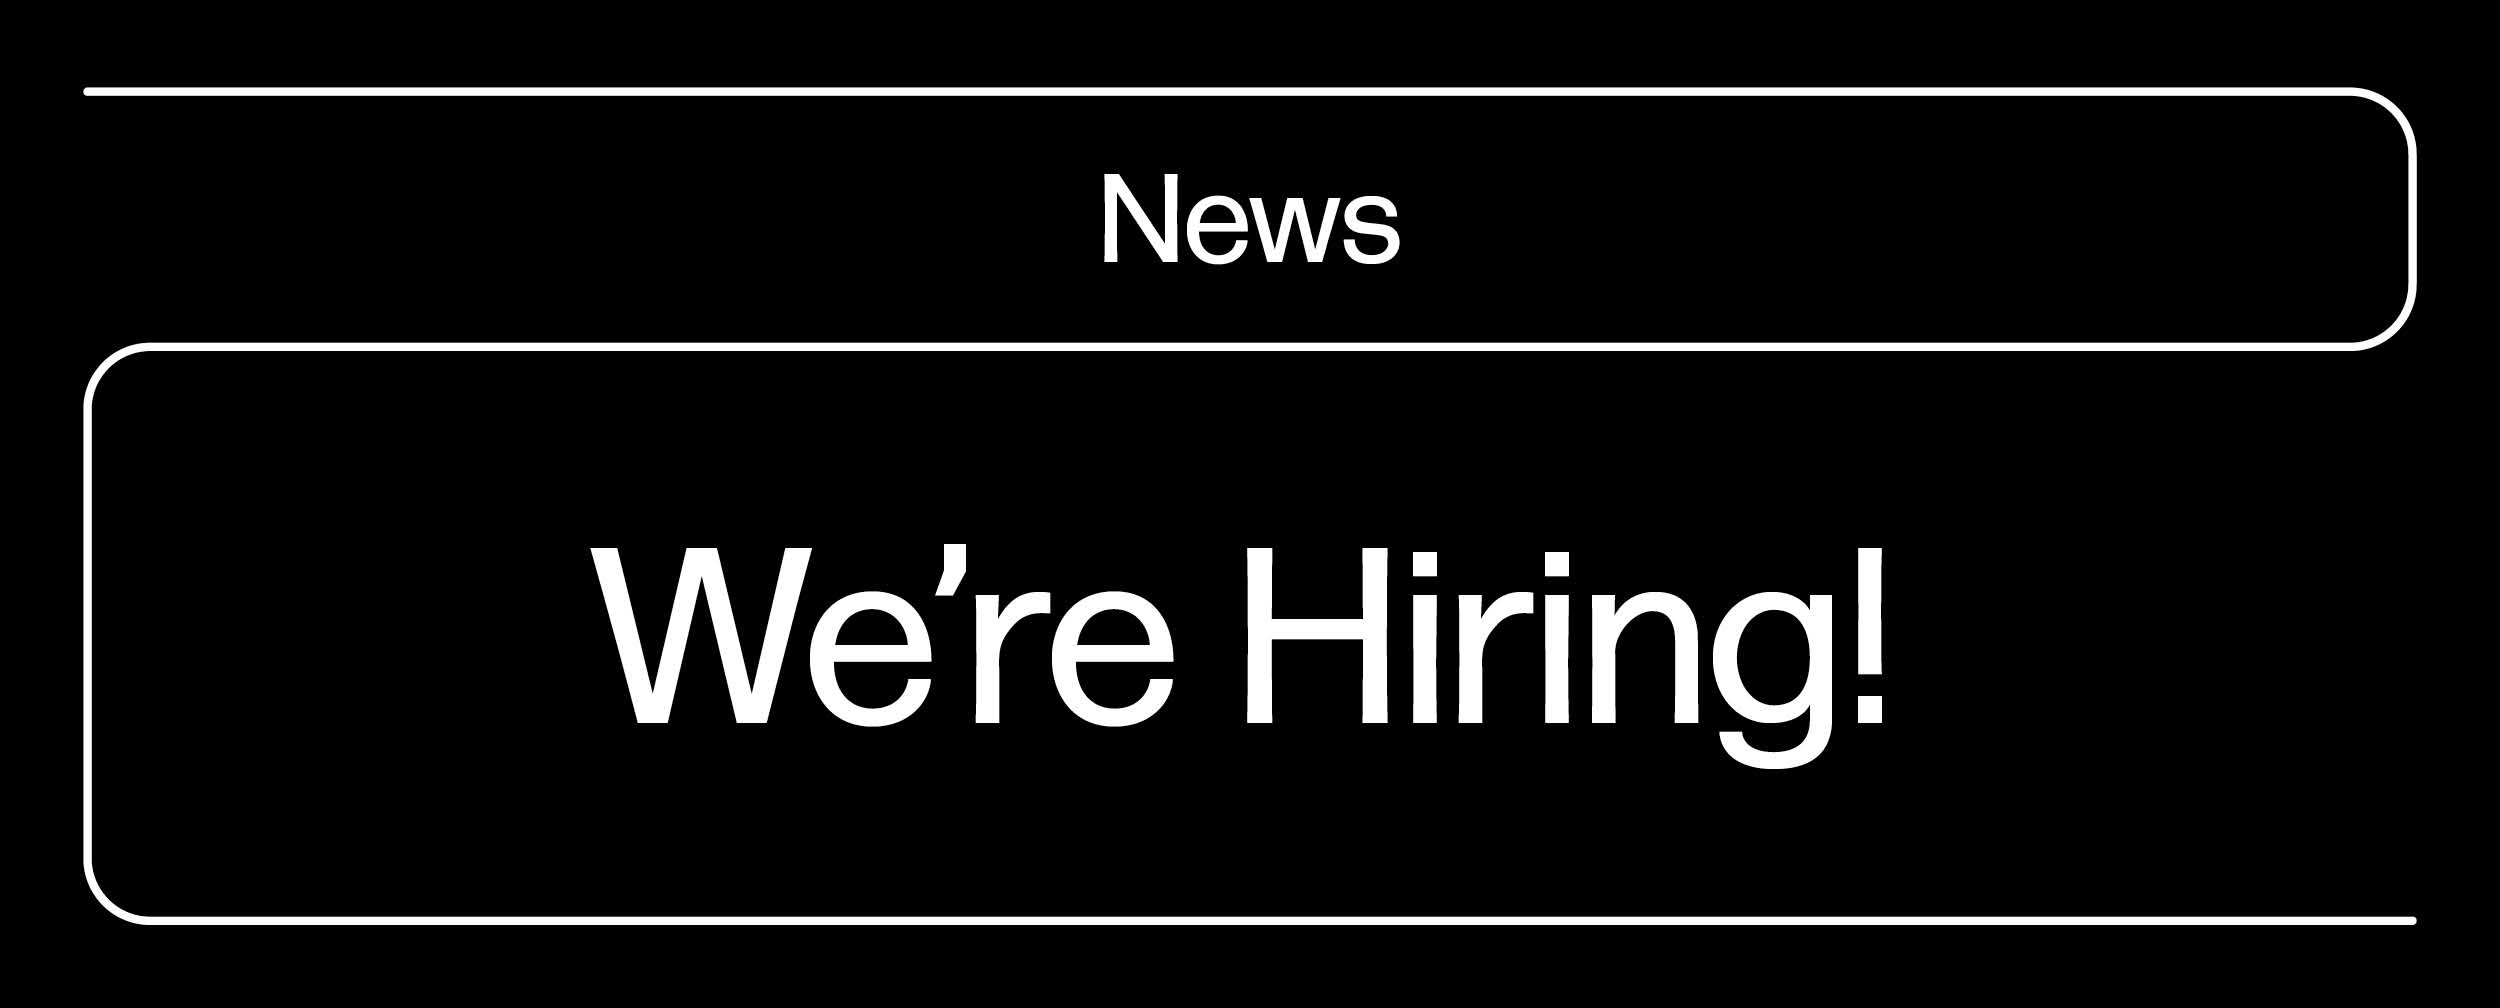 White text on black background that reads "News, we're hiring!"